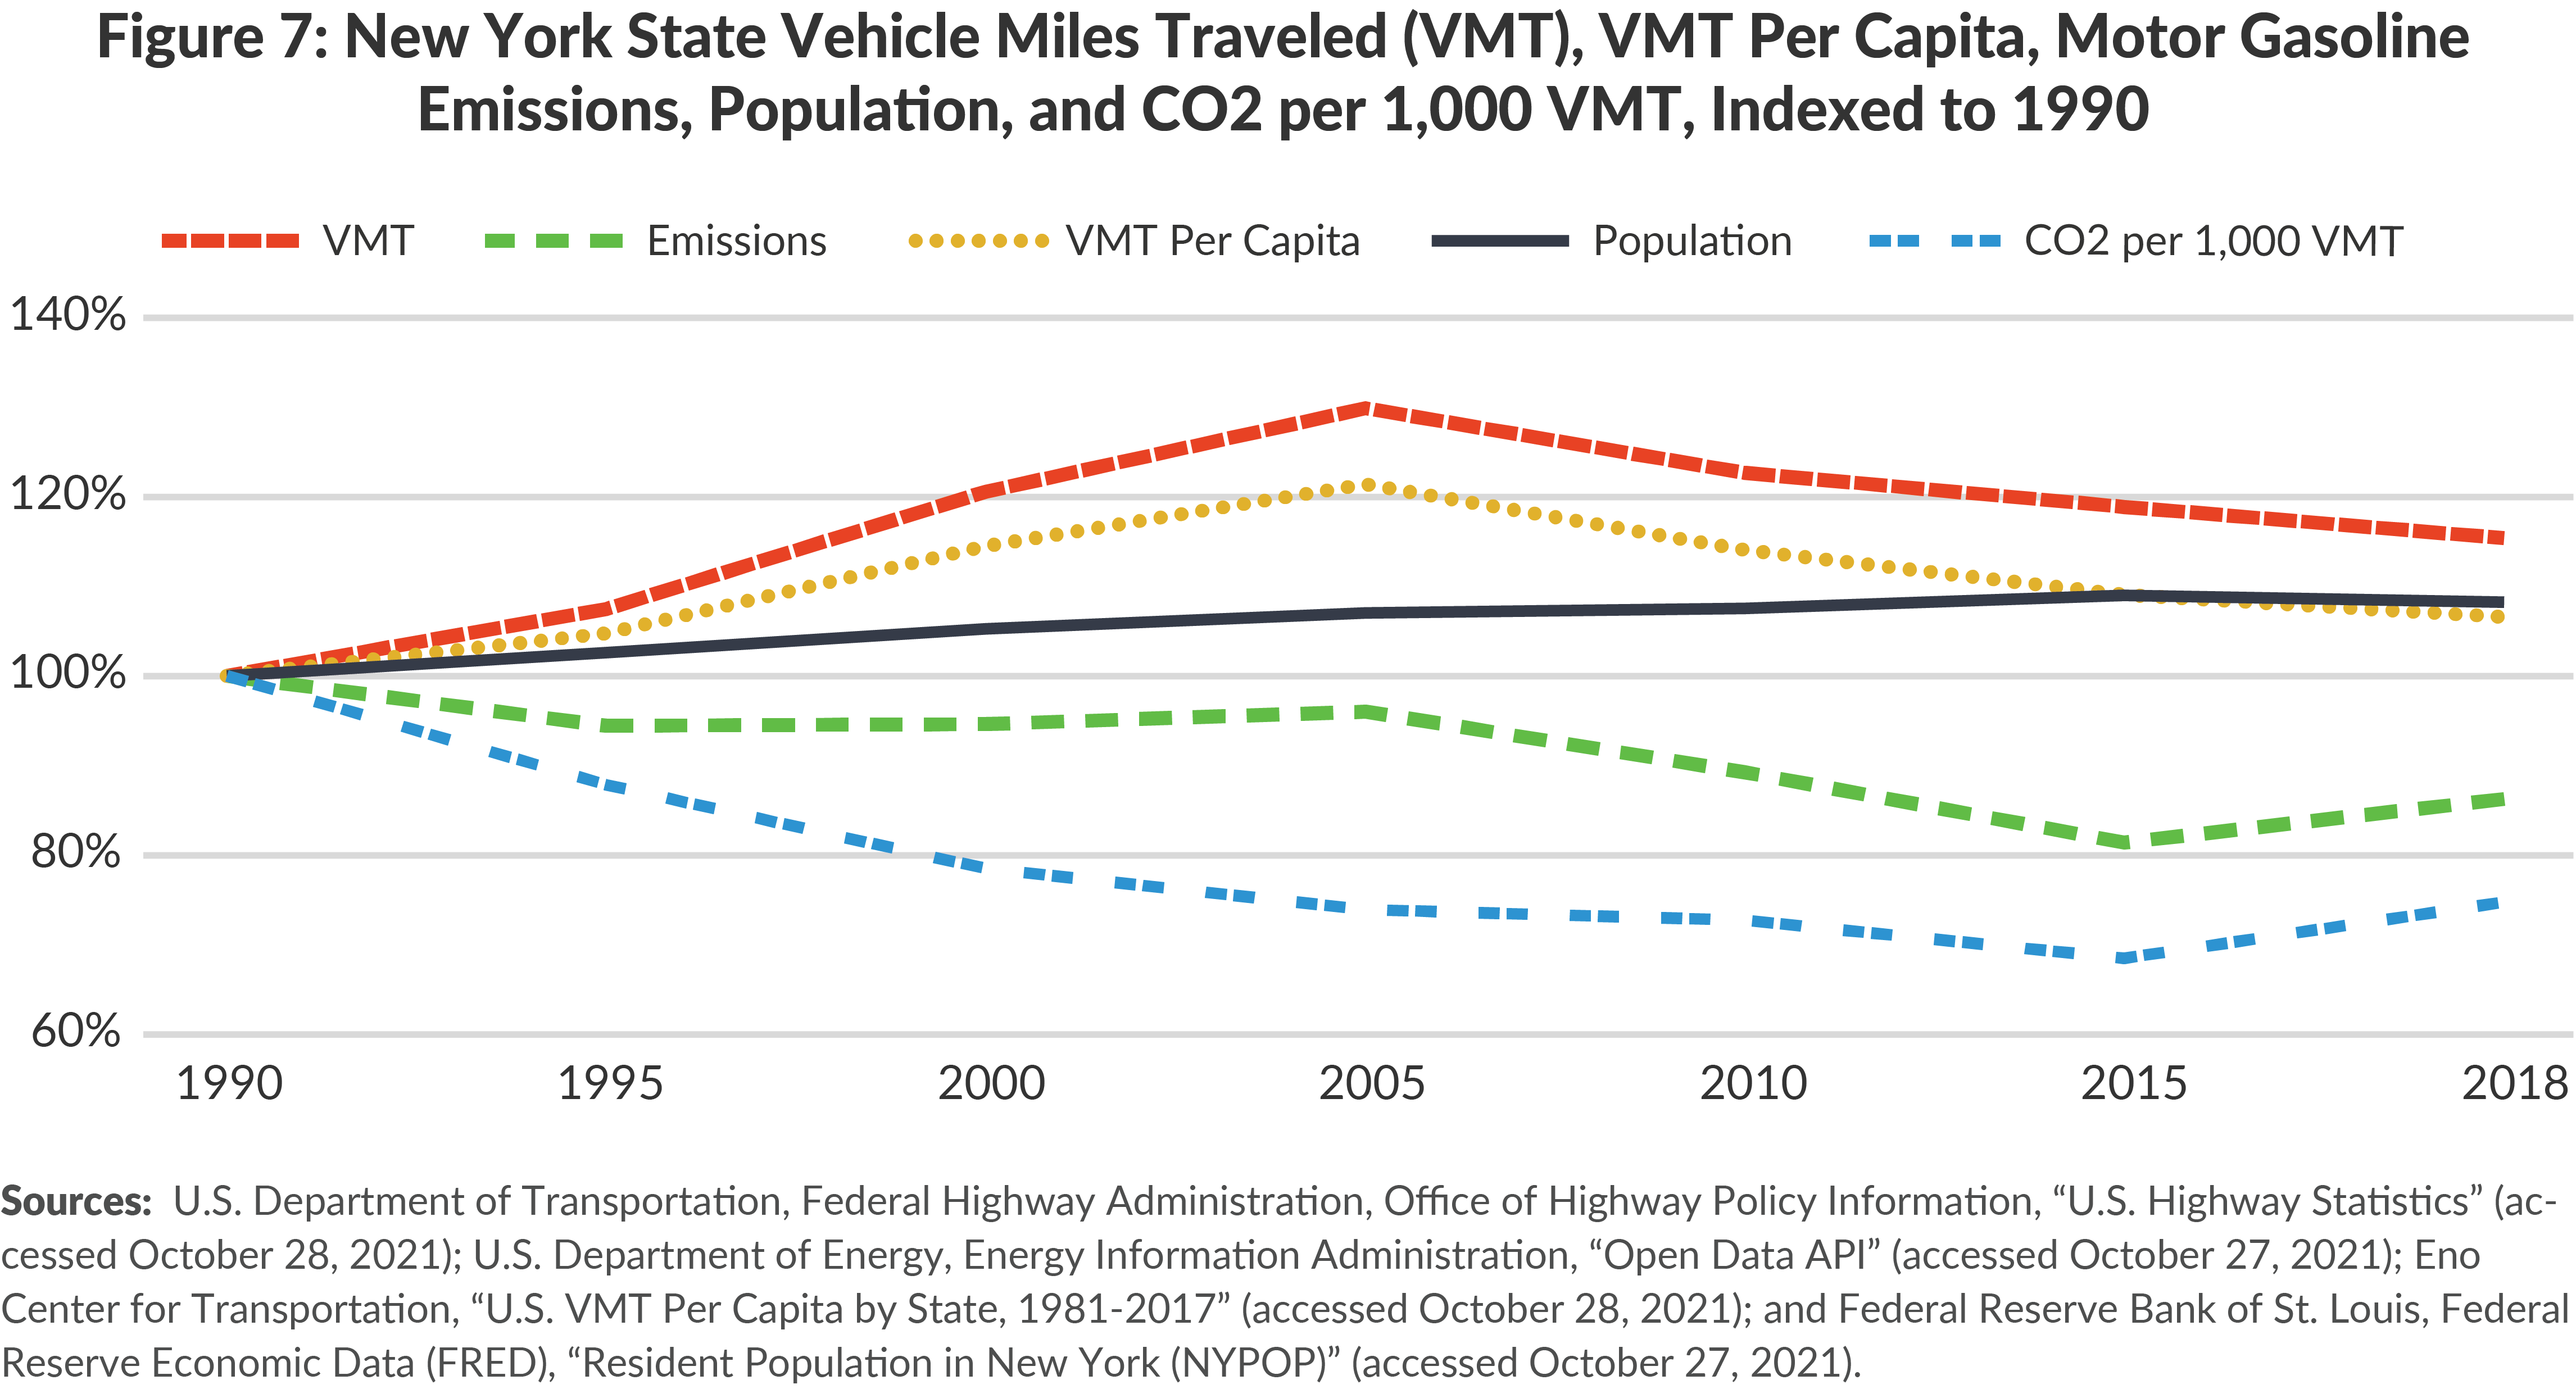 Figure 7: Share of New York State VMT, VMT Per Capita, Motor Gasoline Emissions, Population, and CO2 per 1000 VMT, Indexed to 1990